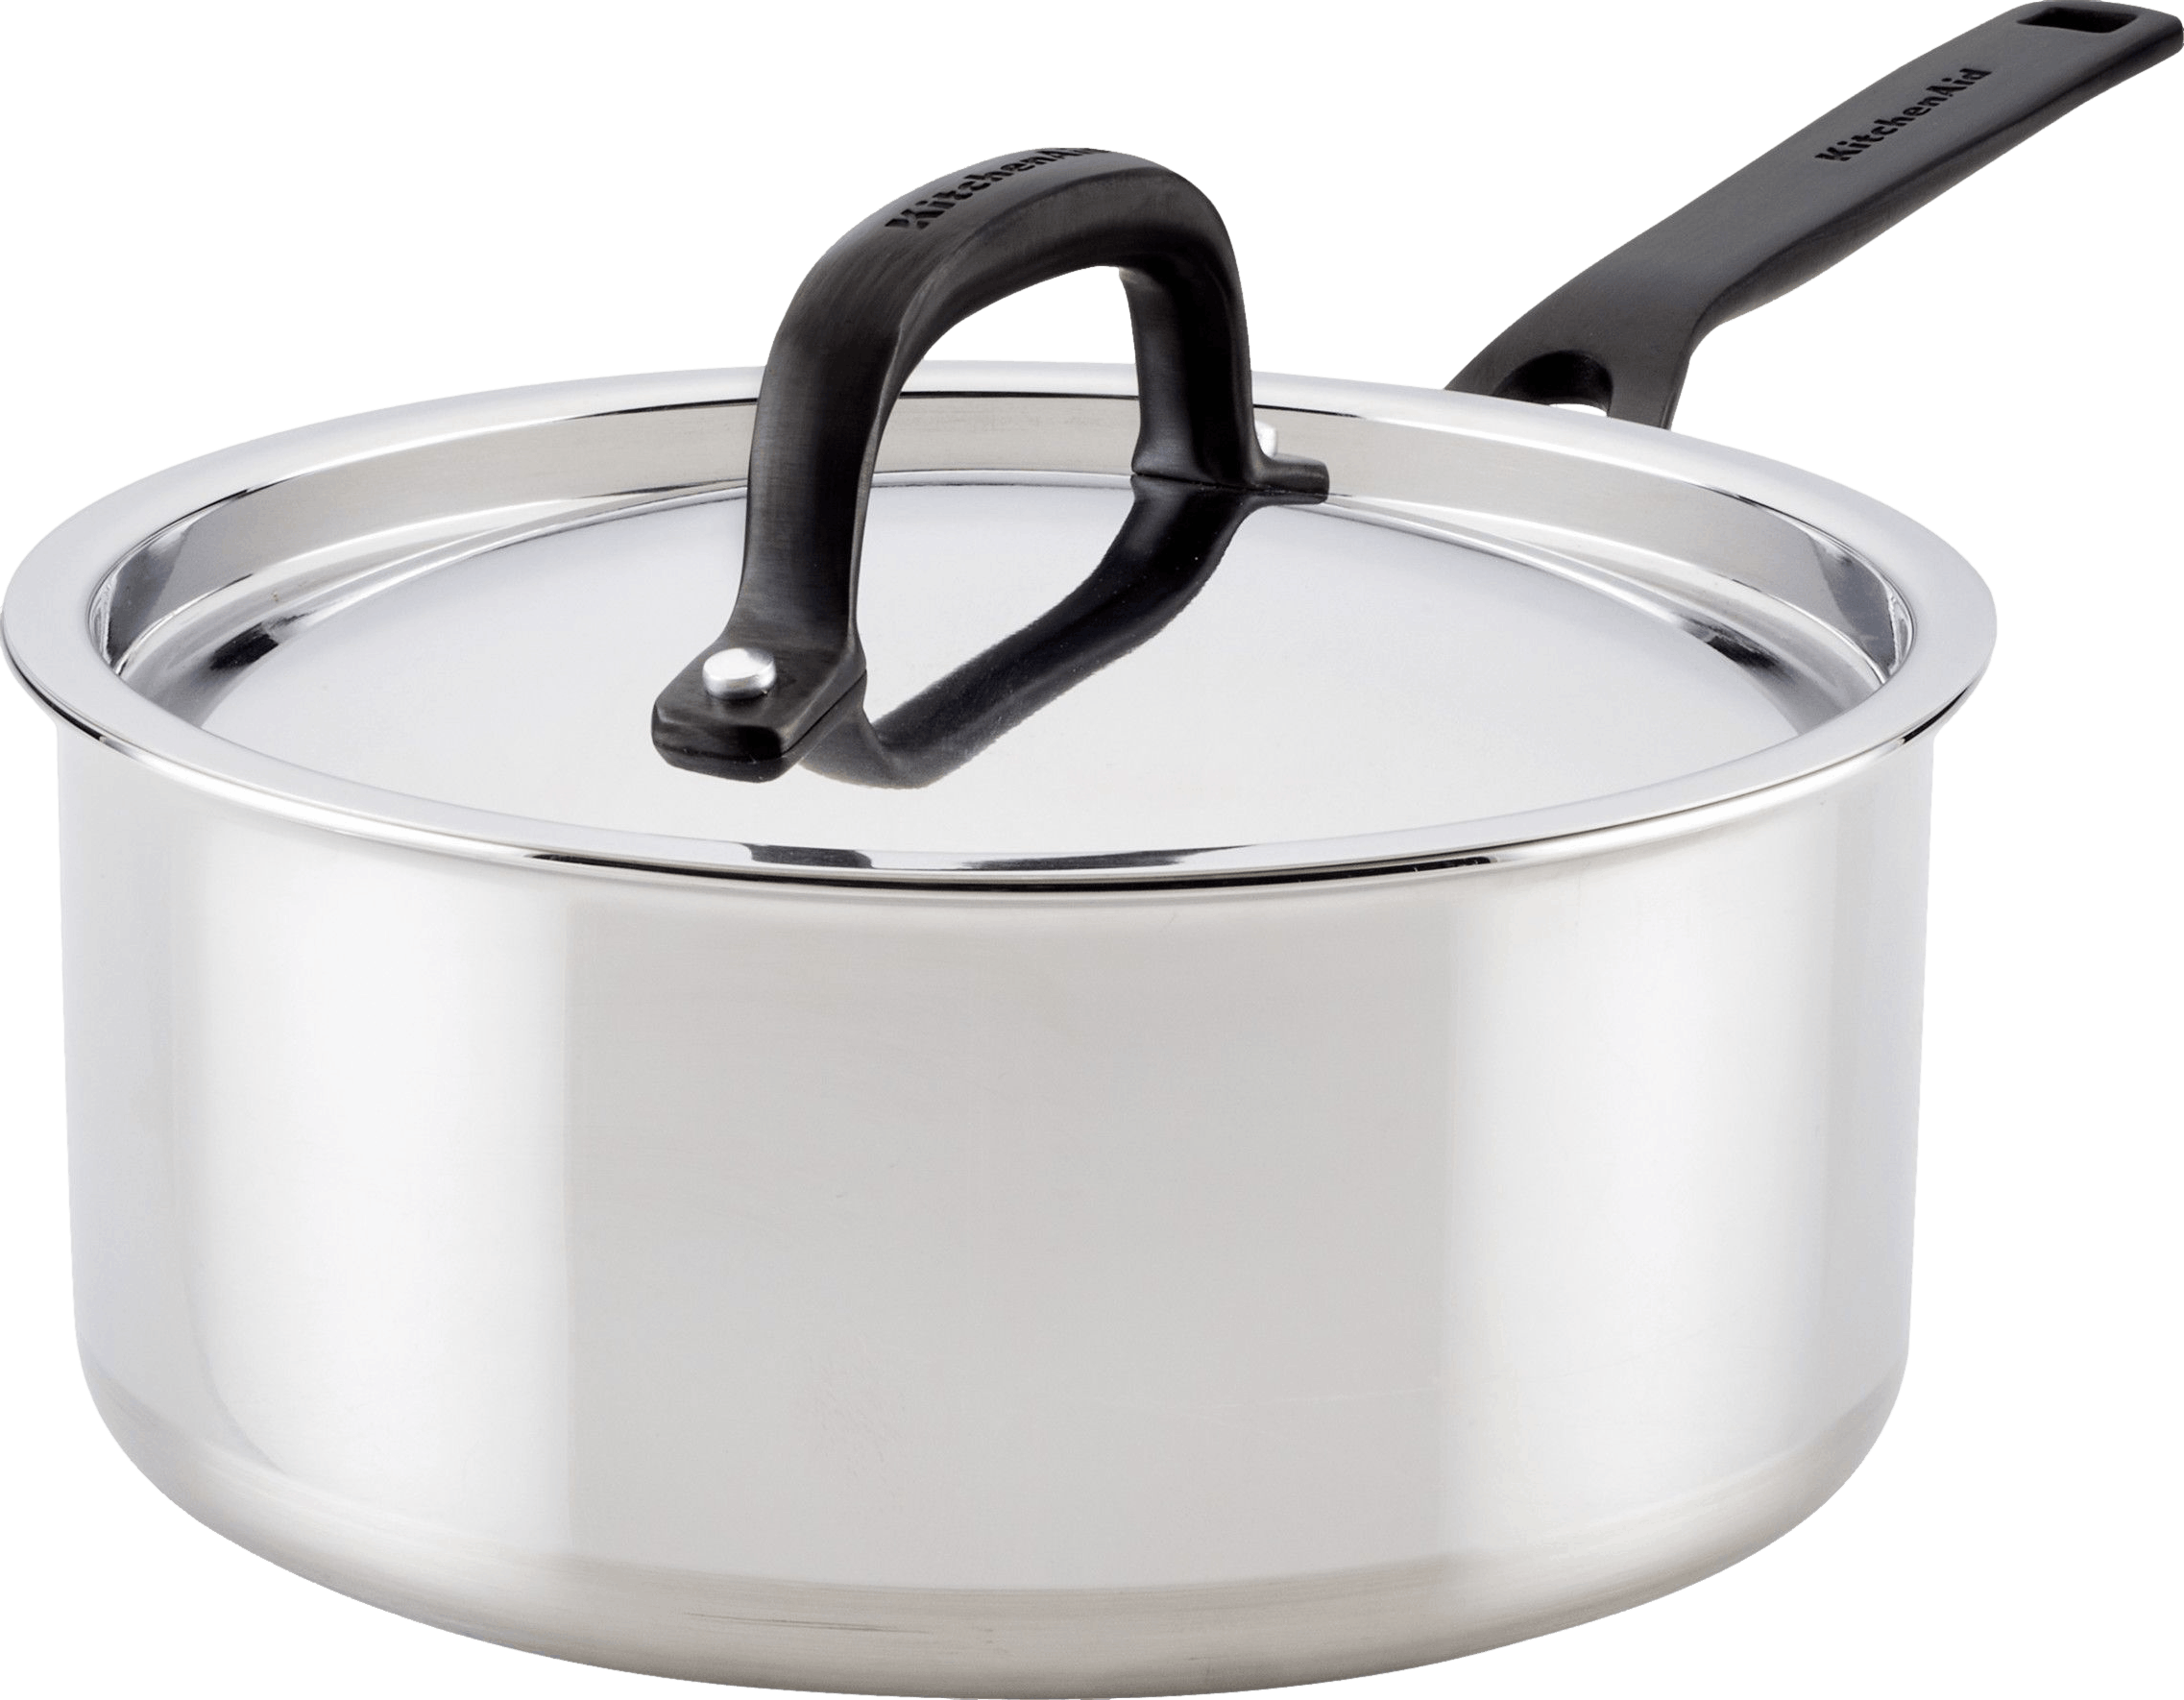 KitchenAid 5-Ply Clad Stainless Steel Induction Saucepan with Lid, 3-Quart, Polished Stainless Steel